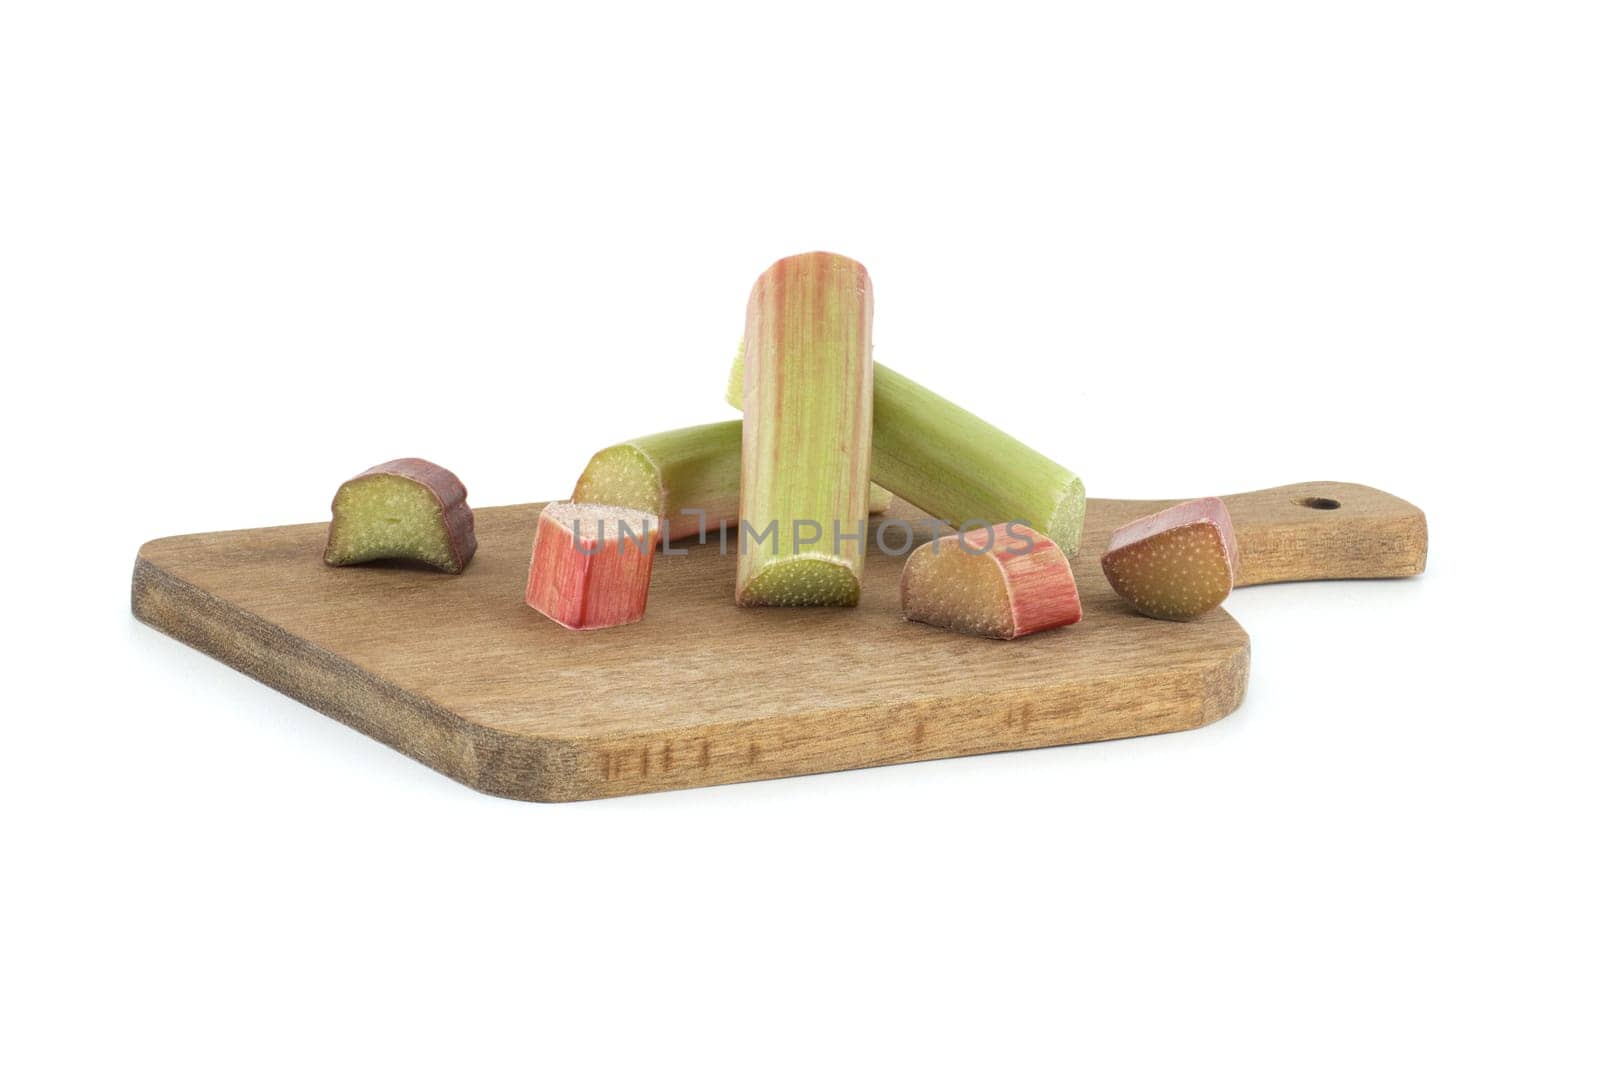 Group of rhubarb pieces in various shapes and sizes arranged in a scattered formation on wooden cutting board isolated on white background